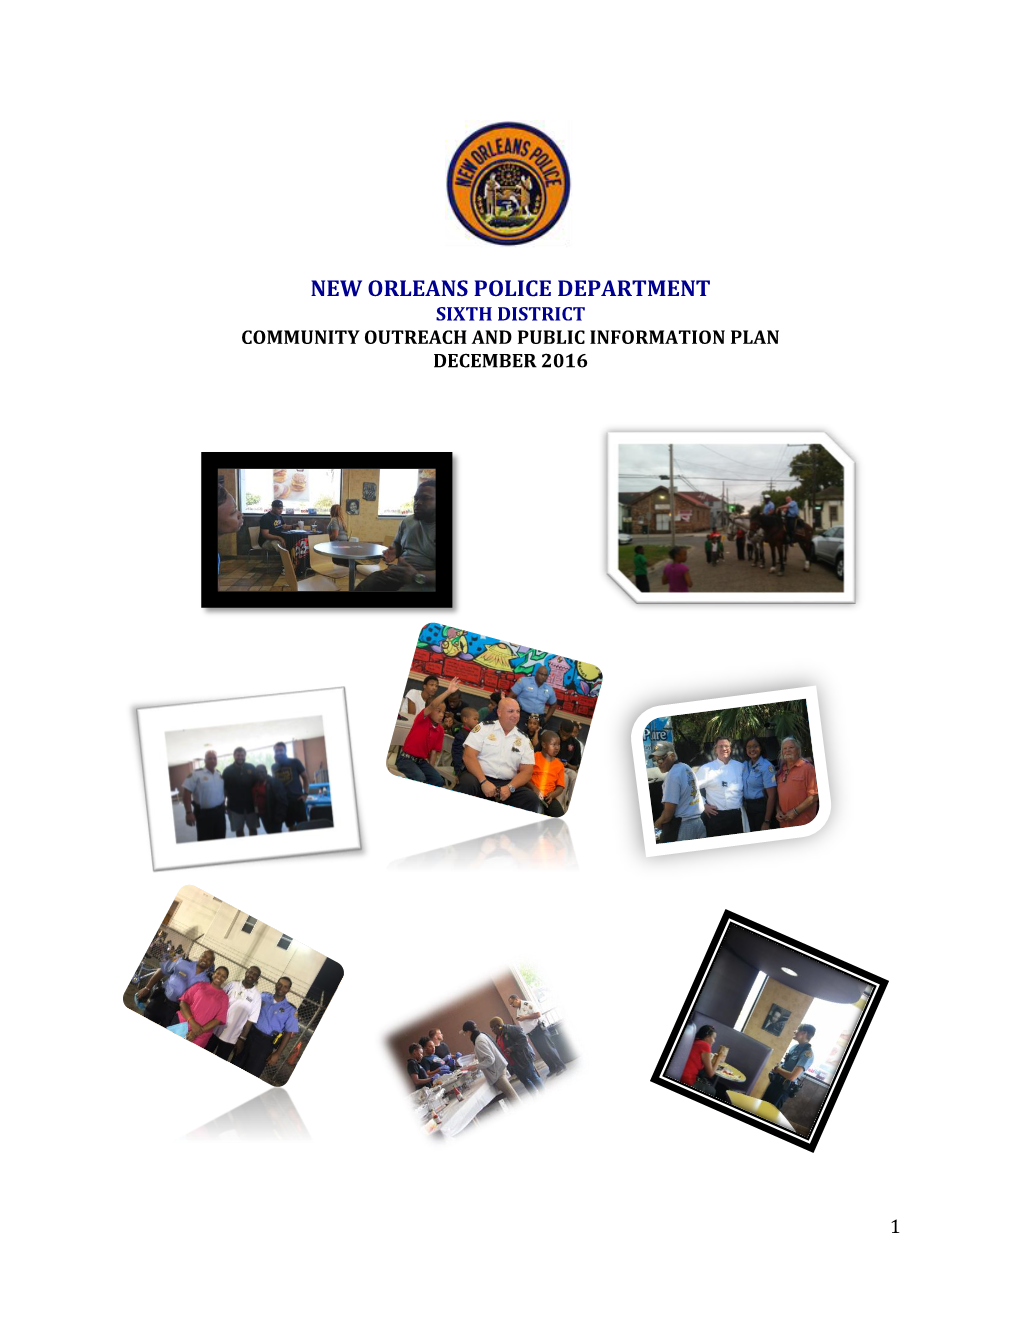 Sixth District Community Outreach and Public Information Plan December 2016